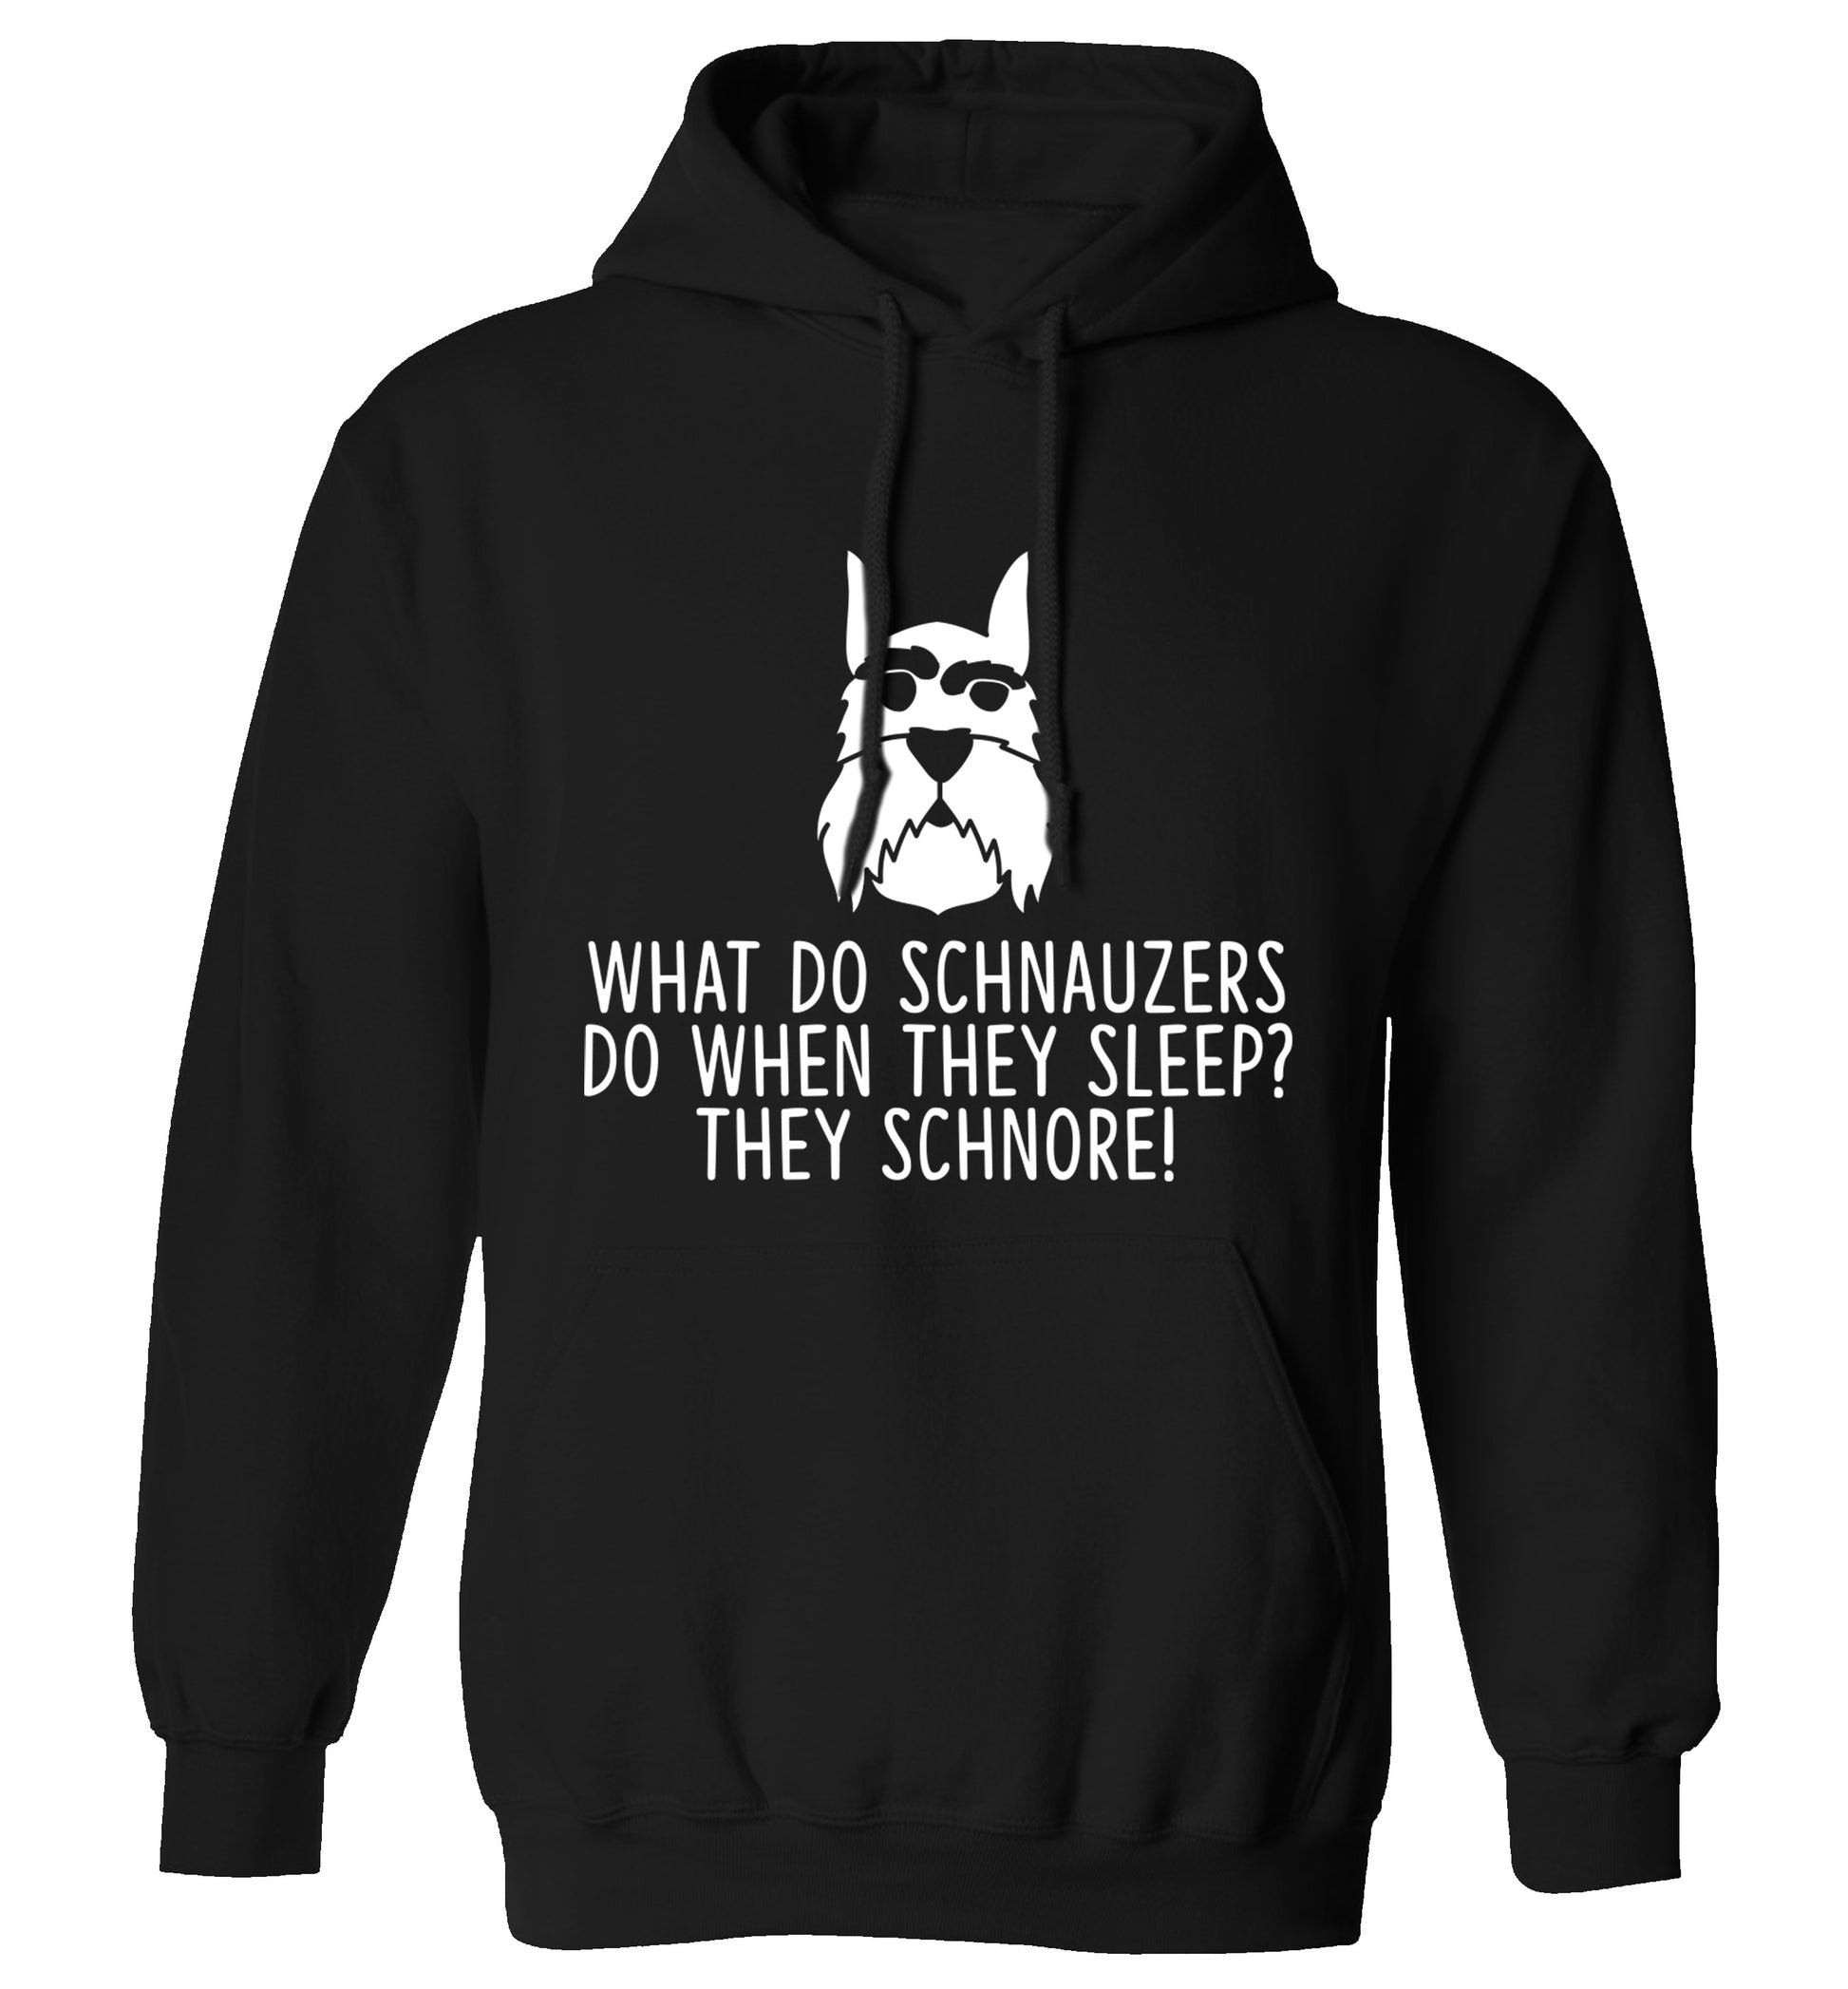 What do schnauzers do when they sleep? Schnore! adults unisex black hoodie 2XL